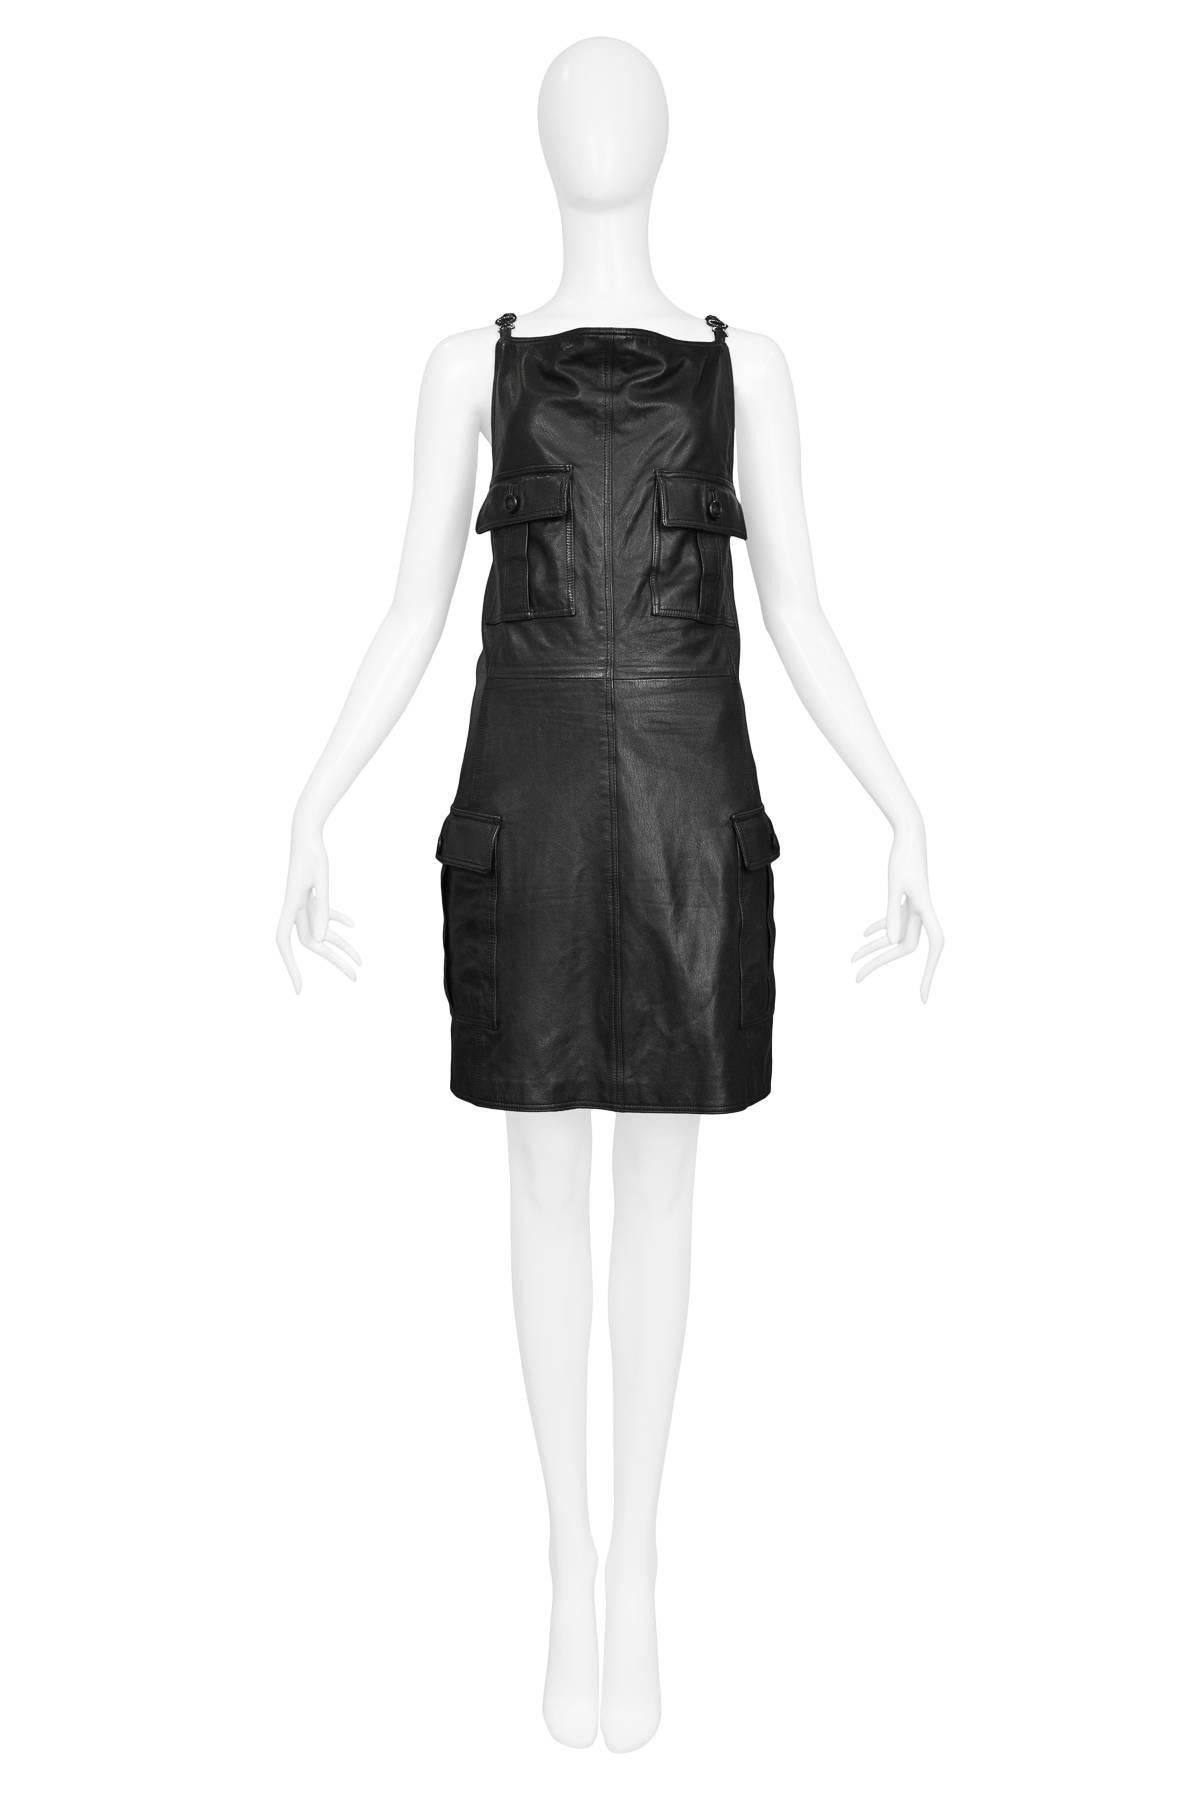 Vintage Gianni Versace black leather jumper dress with 4 patch pockets at front, rhinestone Medusa strap detail & back zip closure. Circa 1990s.

Size: 2/4